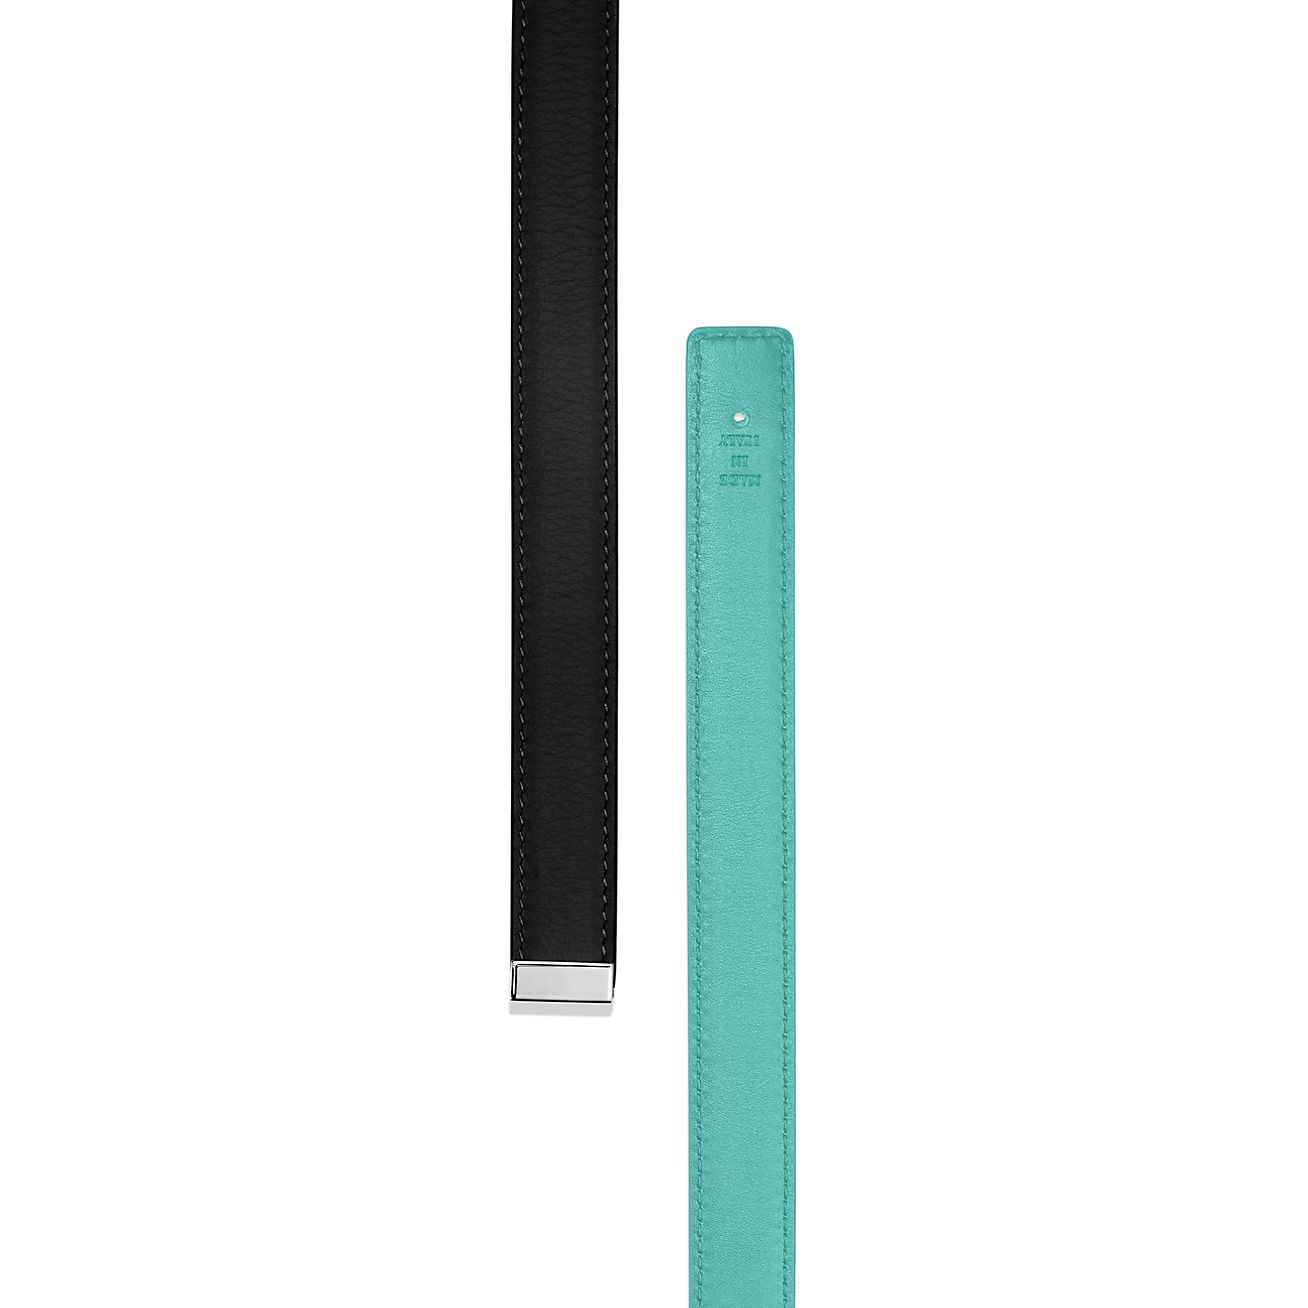 T&CO.® Reversible Belt Strap in Tiffany Blue and Black Leather, 20